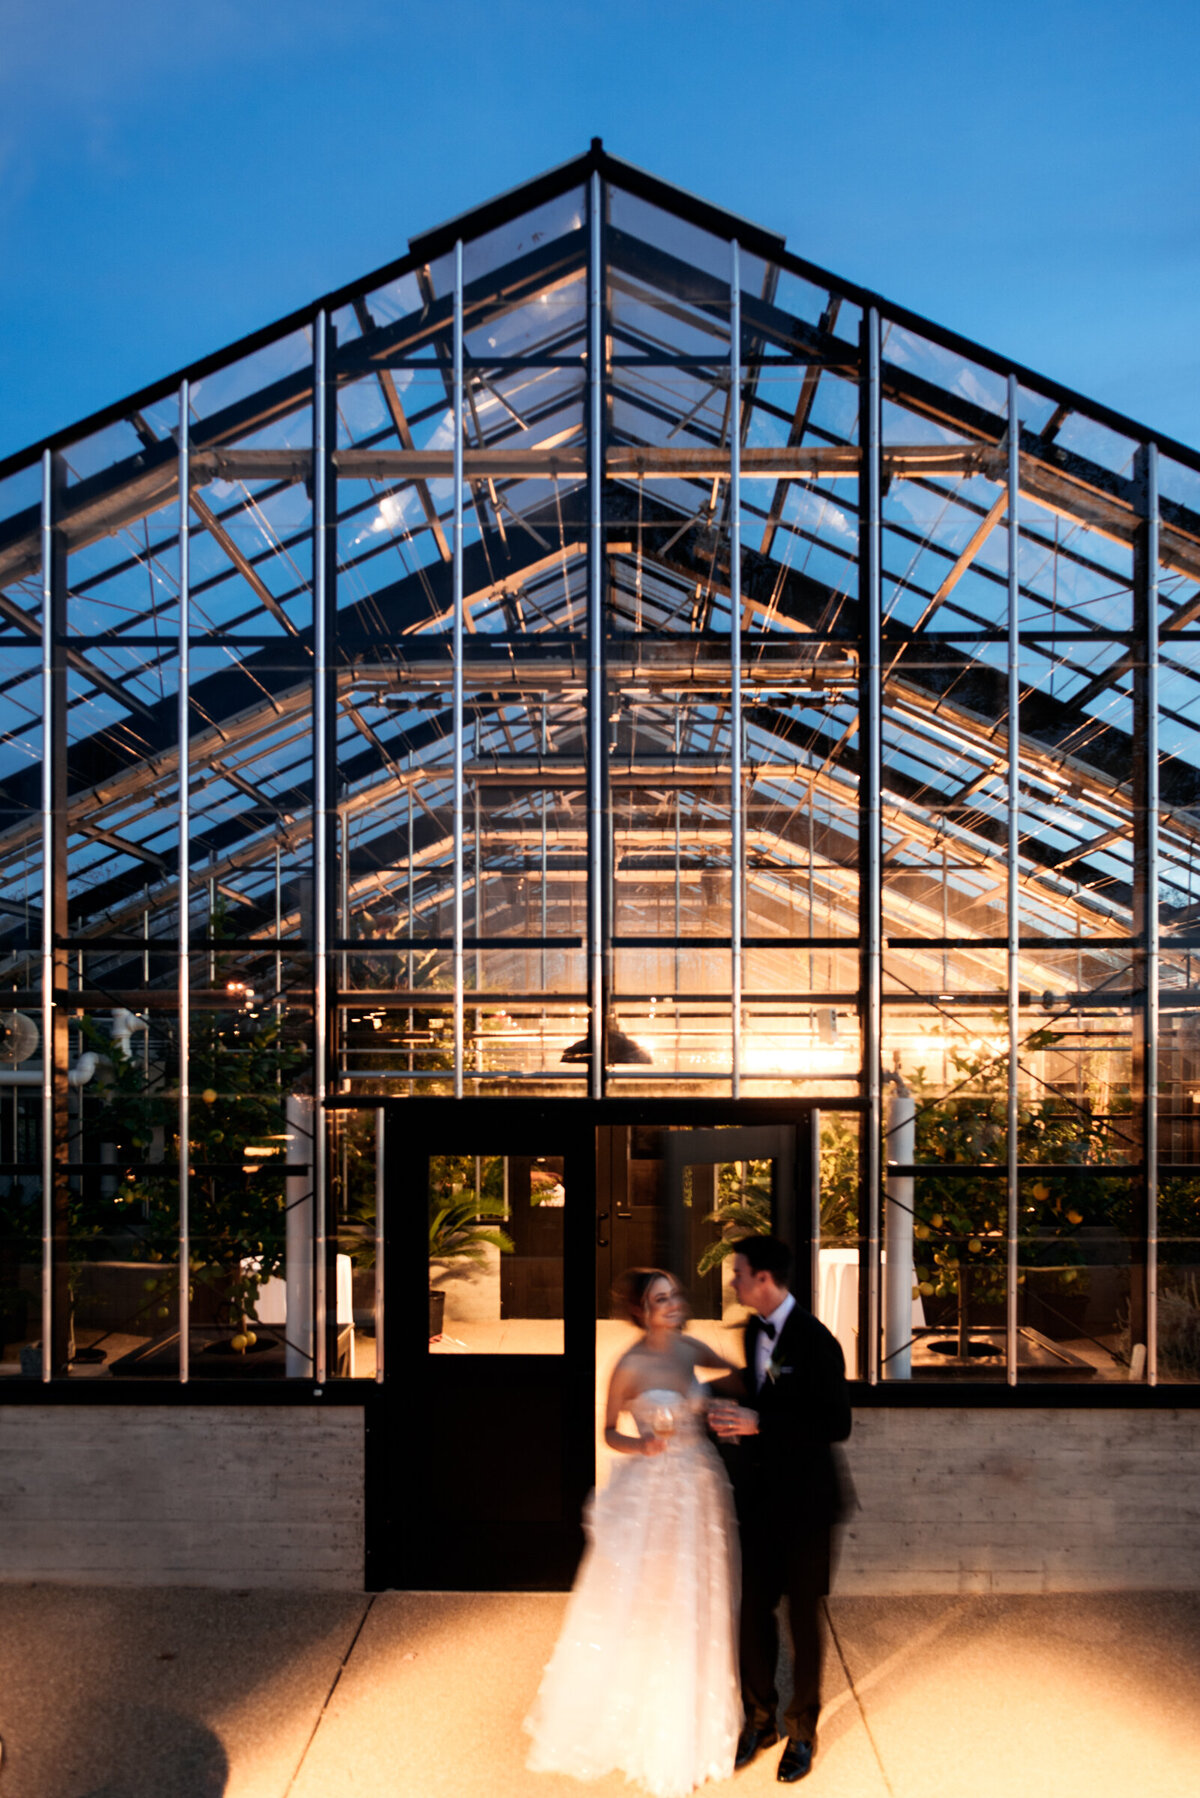 bride and groom standing outside a greenhouse at night at their wedding